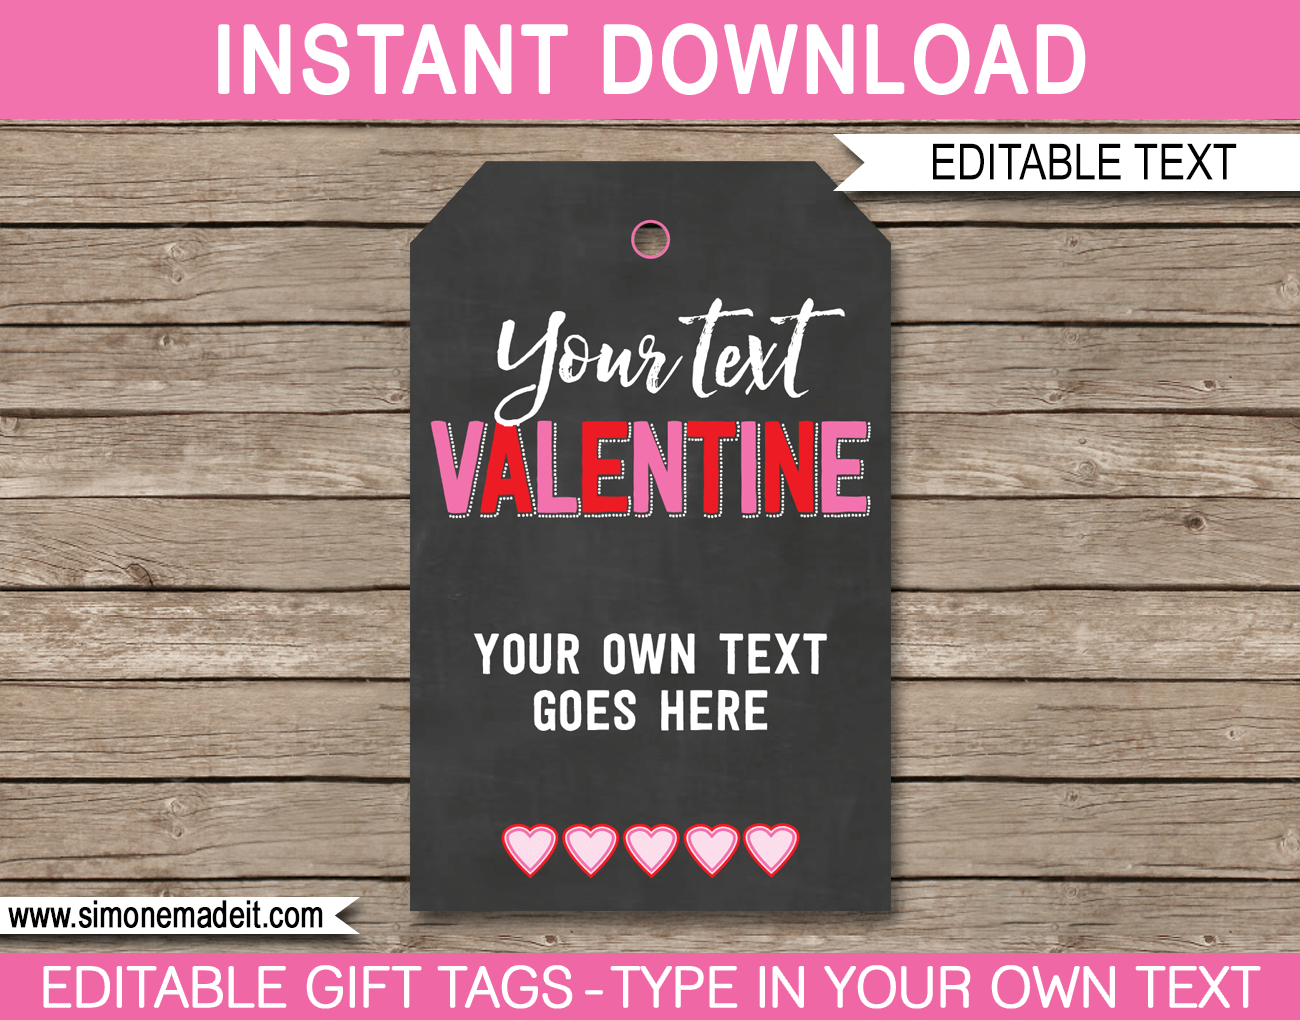 Valentine's Day Gift Tags Template | editable & printable | Be my Valentine | INSTANT DOWNLOAD $3.00 via simonemadeit.com